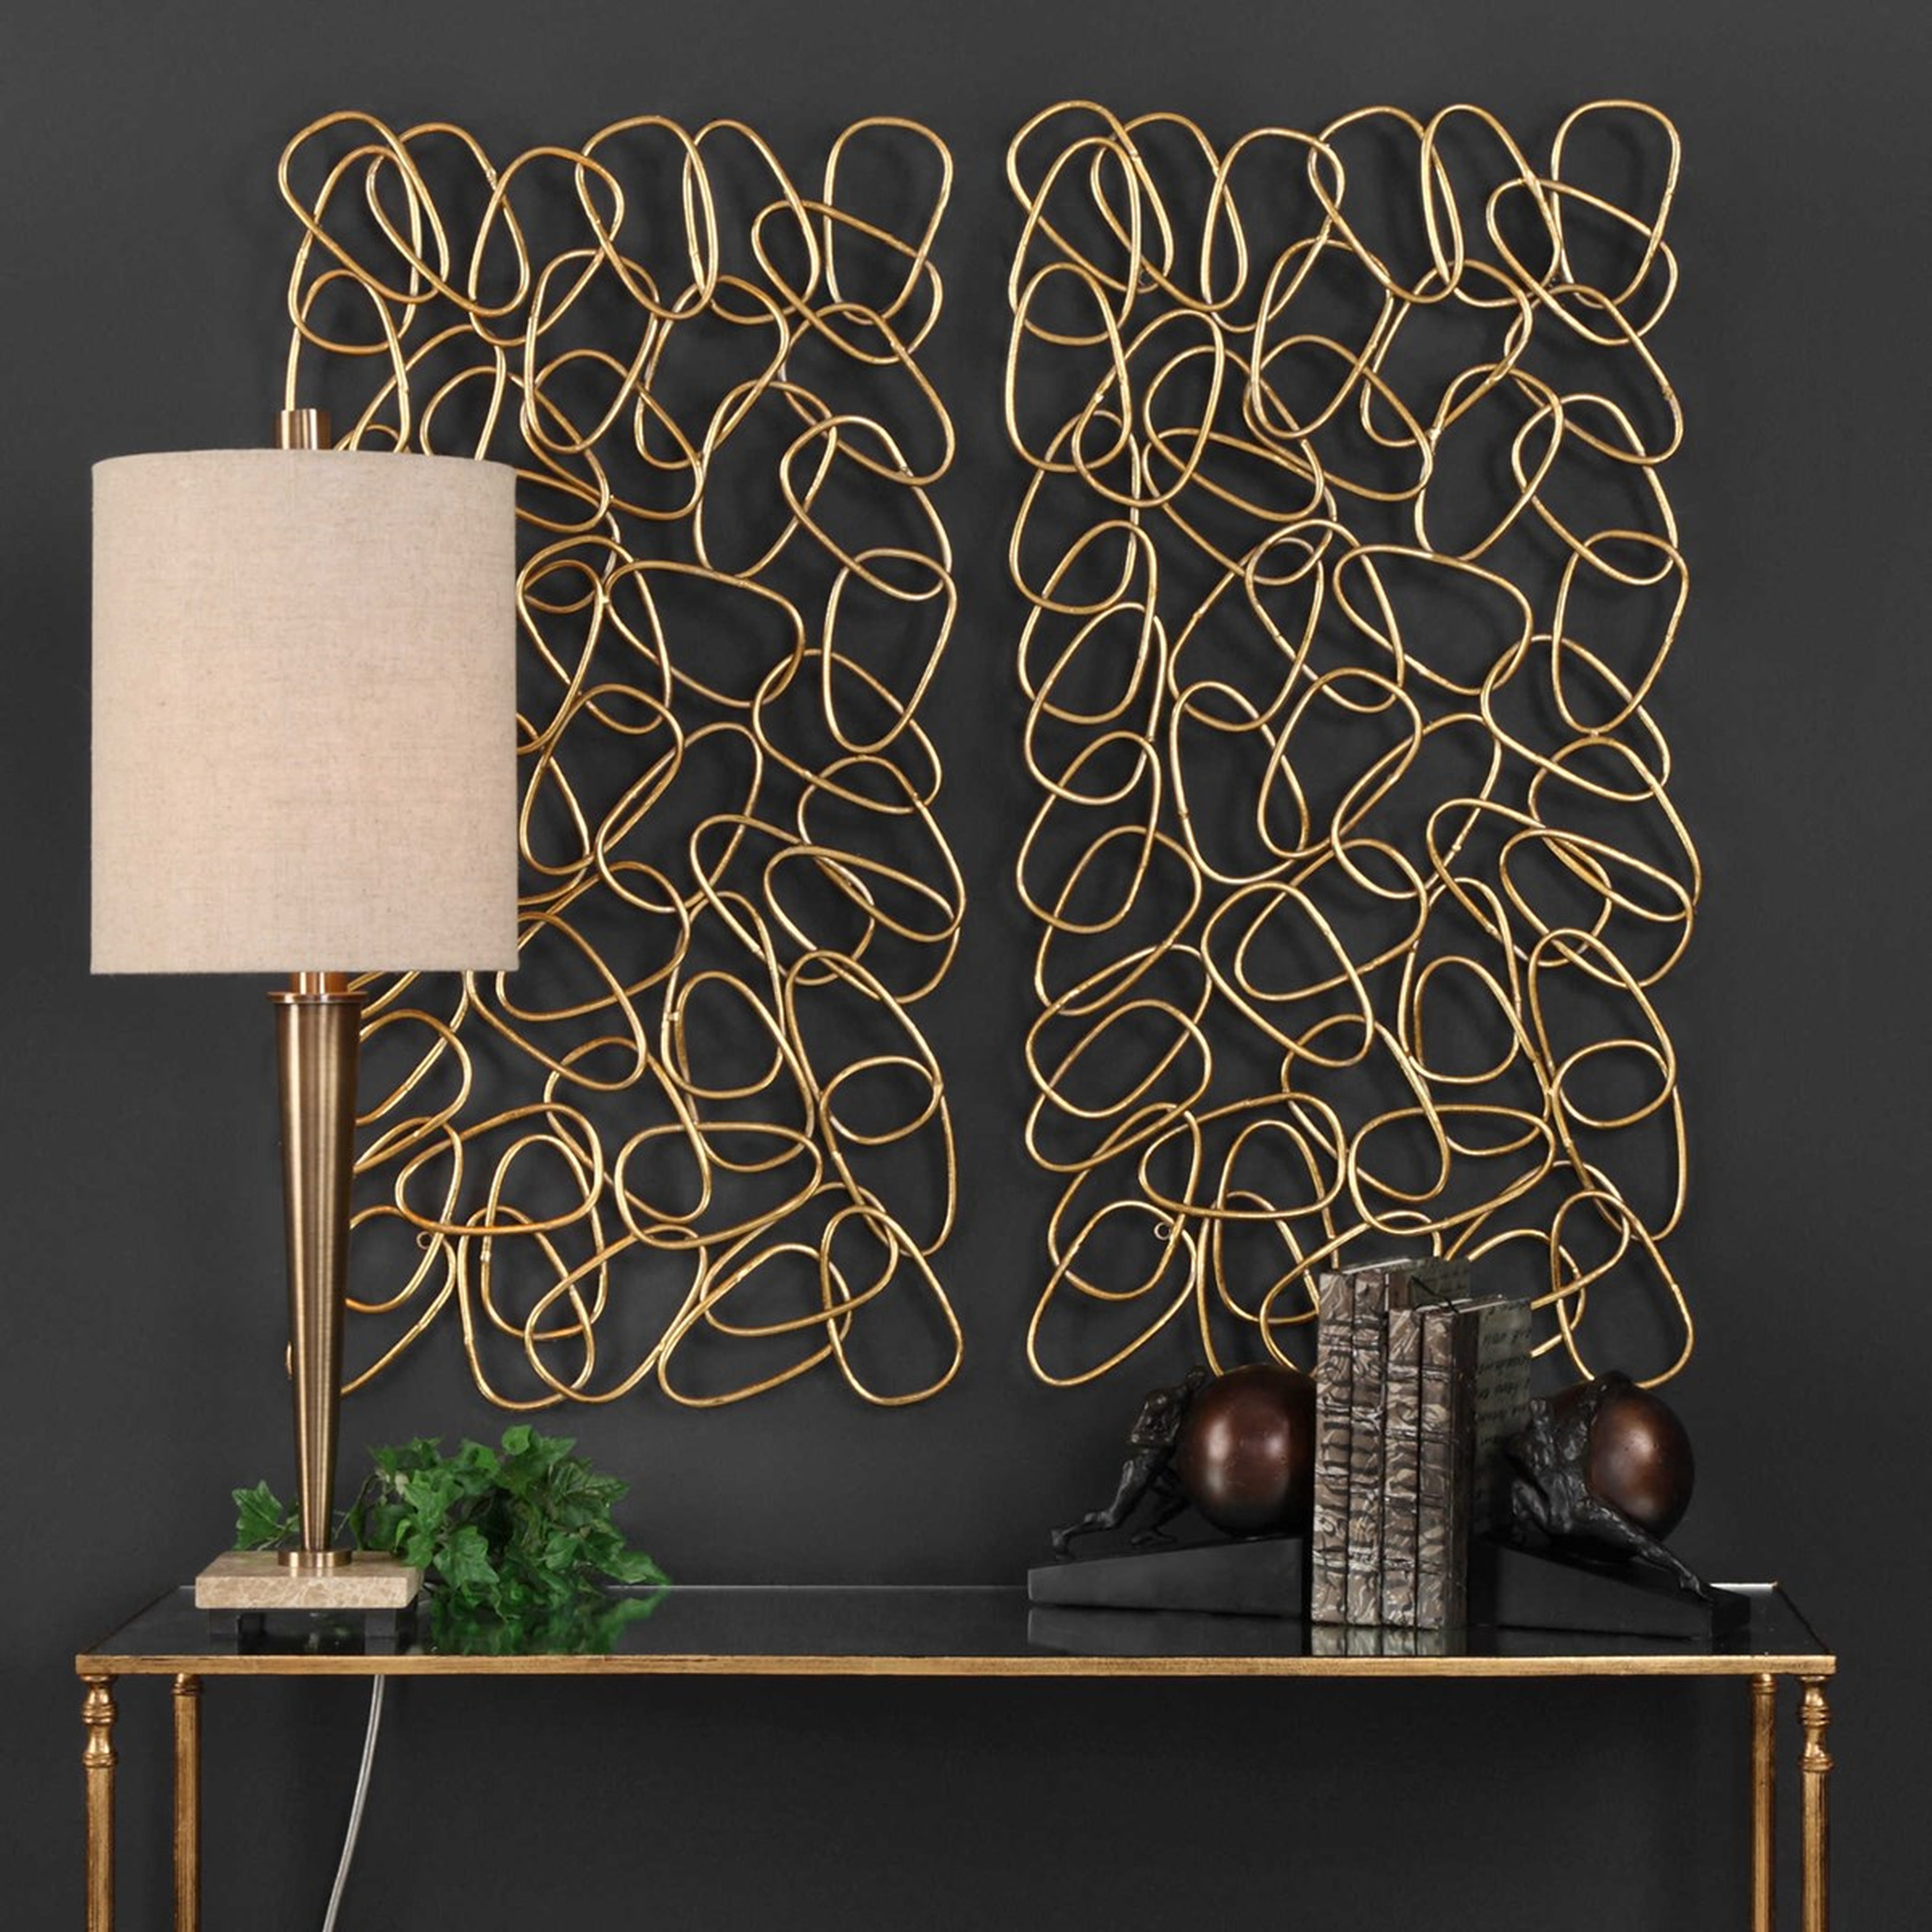 IN THE LOOP METAL WALL PANELS, S/2 - Hudsonhill Foundry